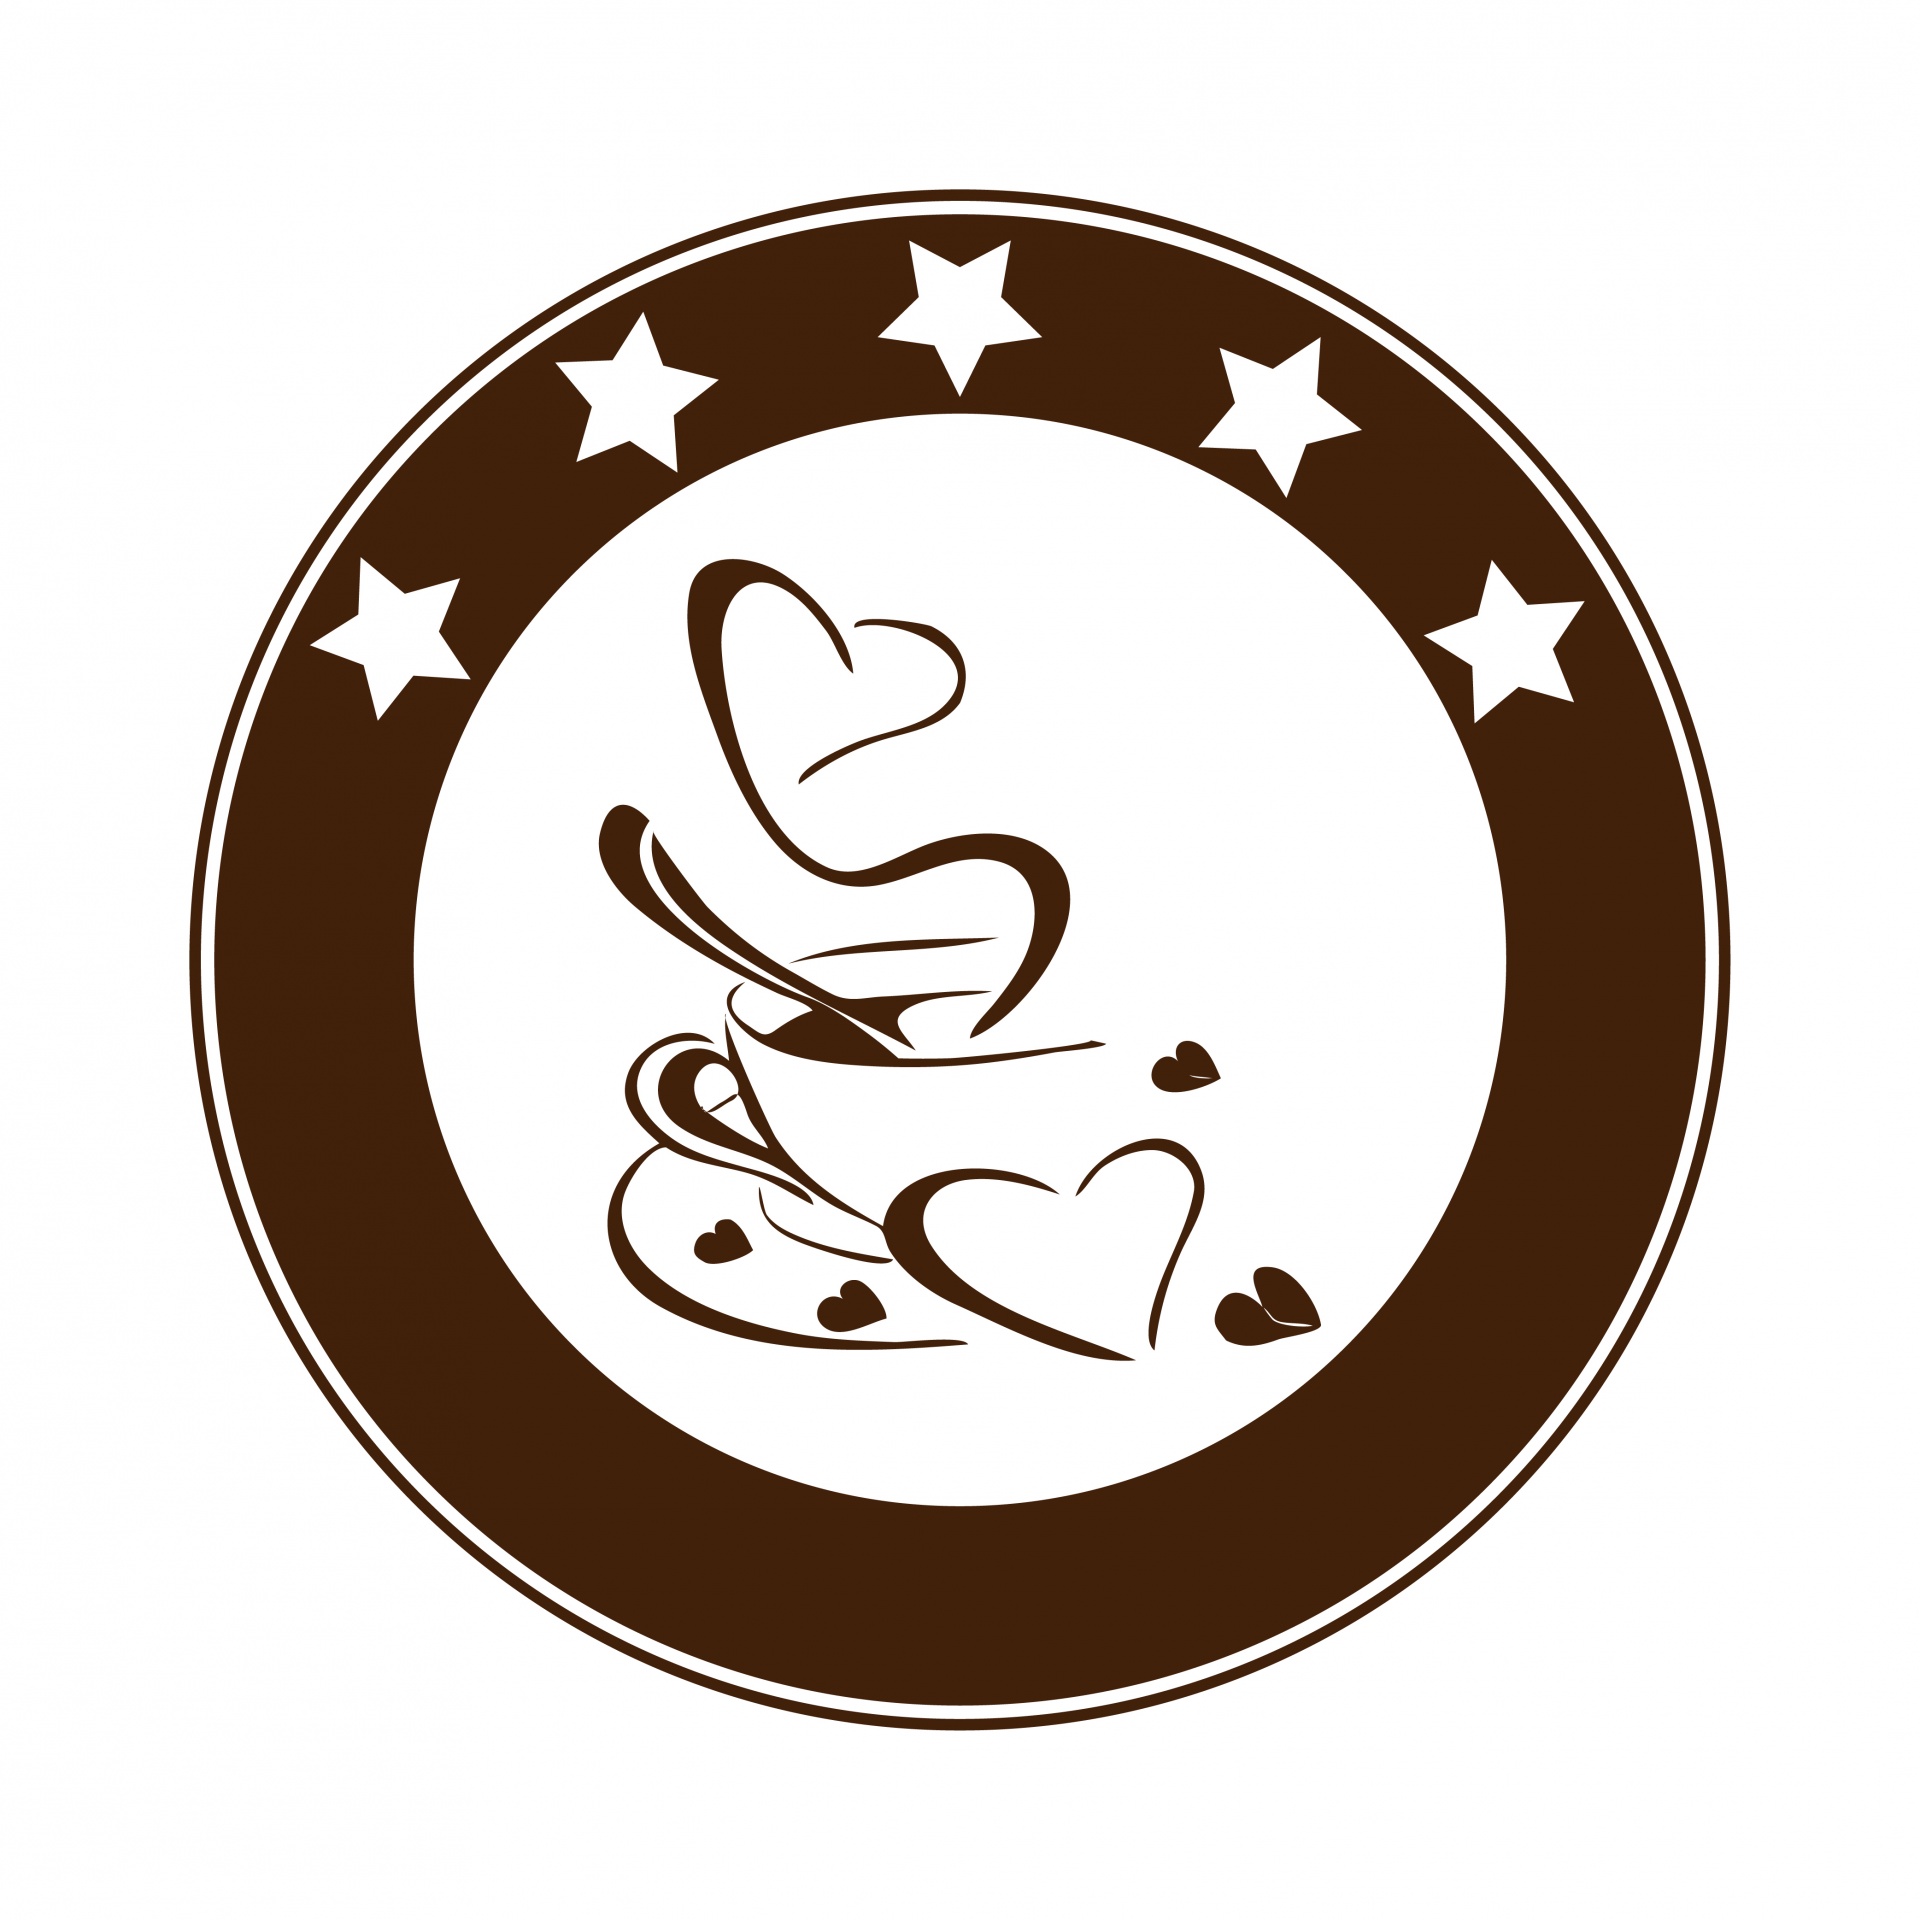 Illustration of coffee cup with coffee bean hearts logo on white background